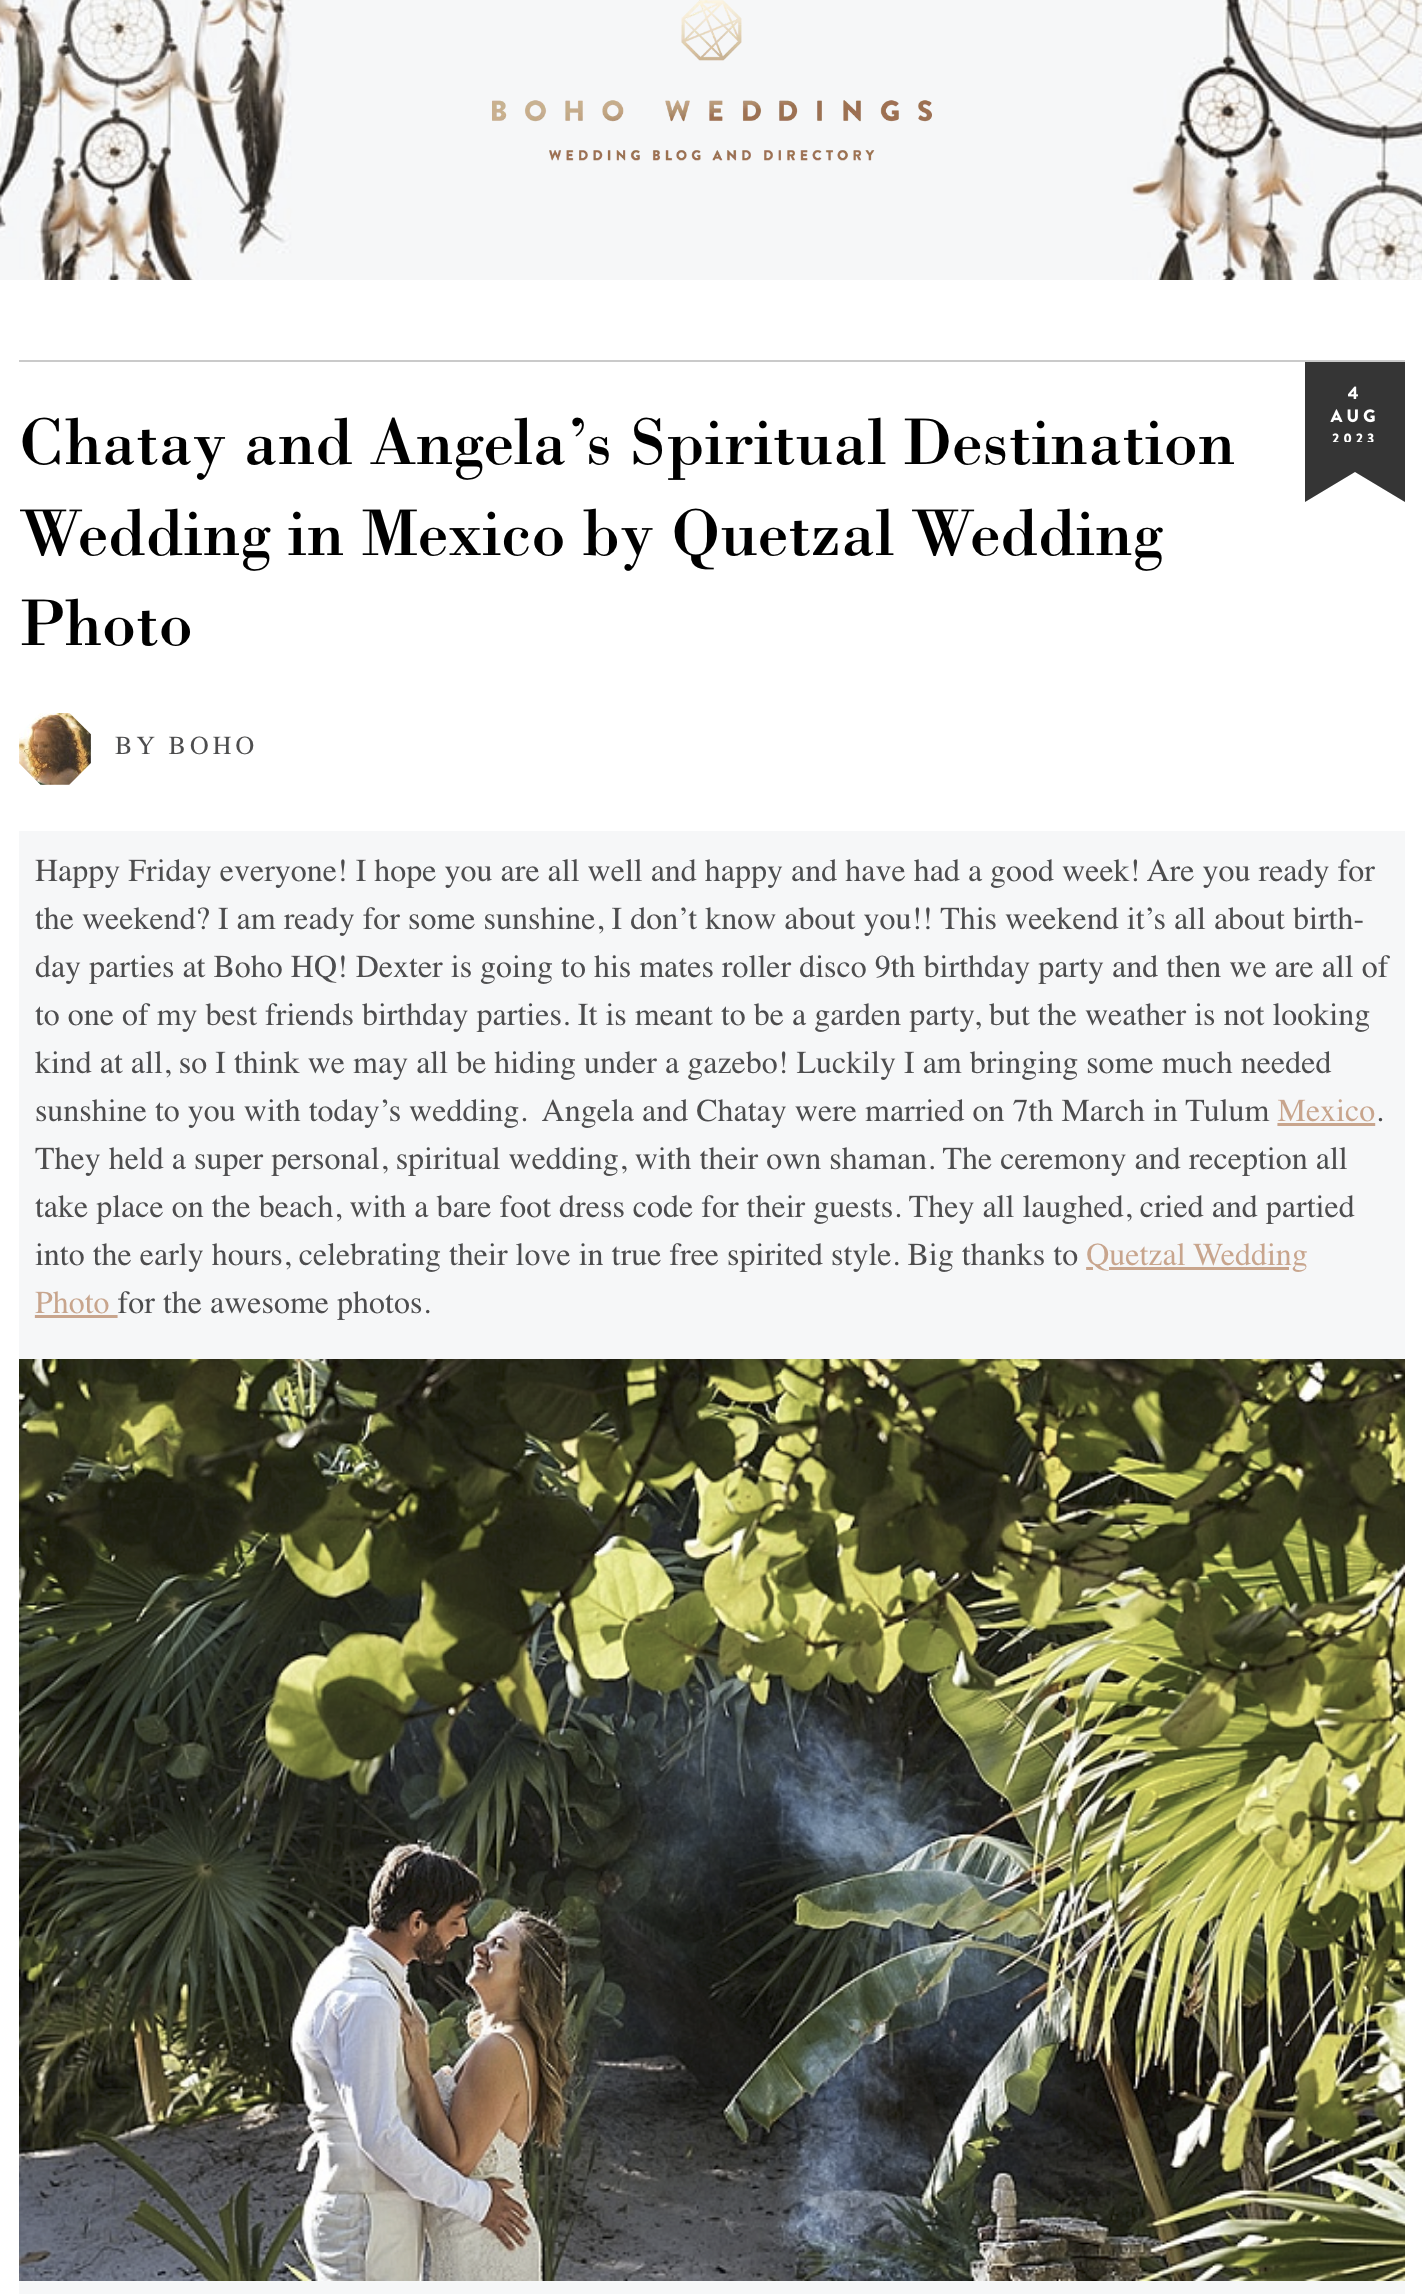 Chatay and Angela’s Spiritual Destination Wedding in Mexico by Quetzal Wedding Photo